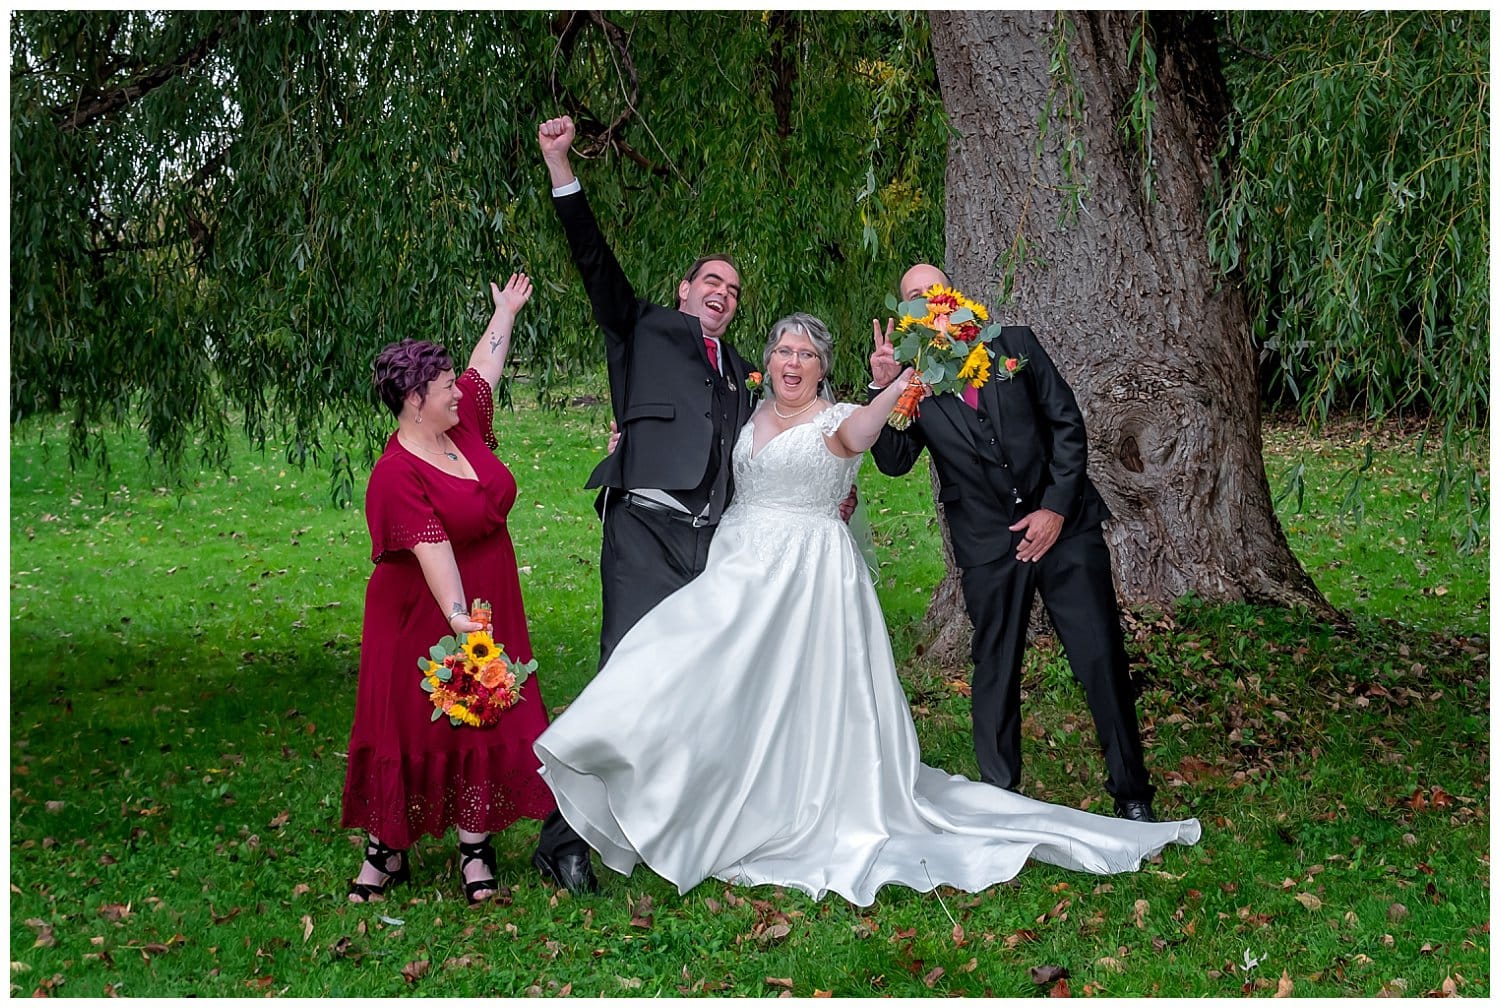 The bride and groom with their wedding party pose for funny photos in Windsor NS.